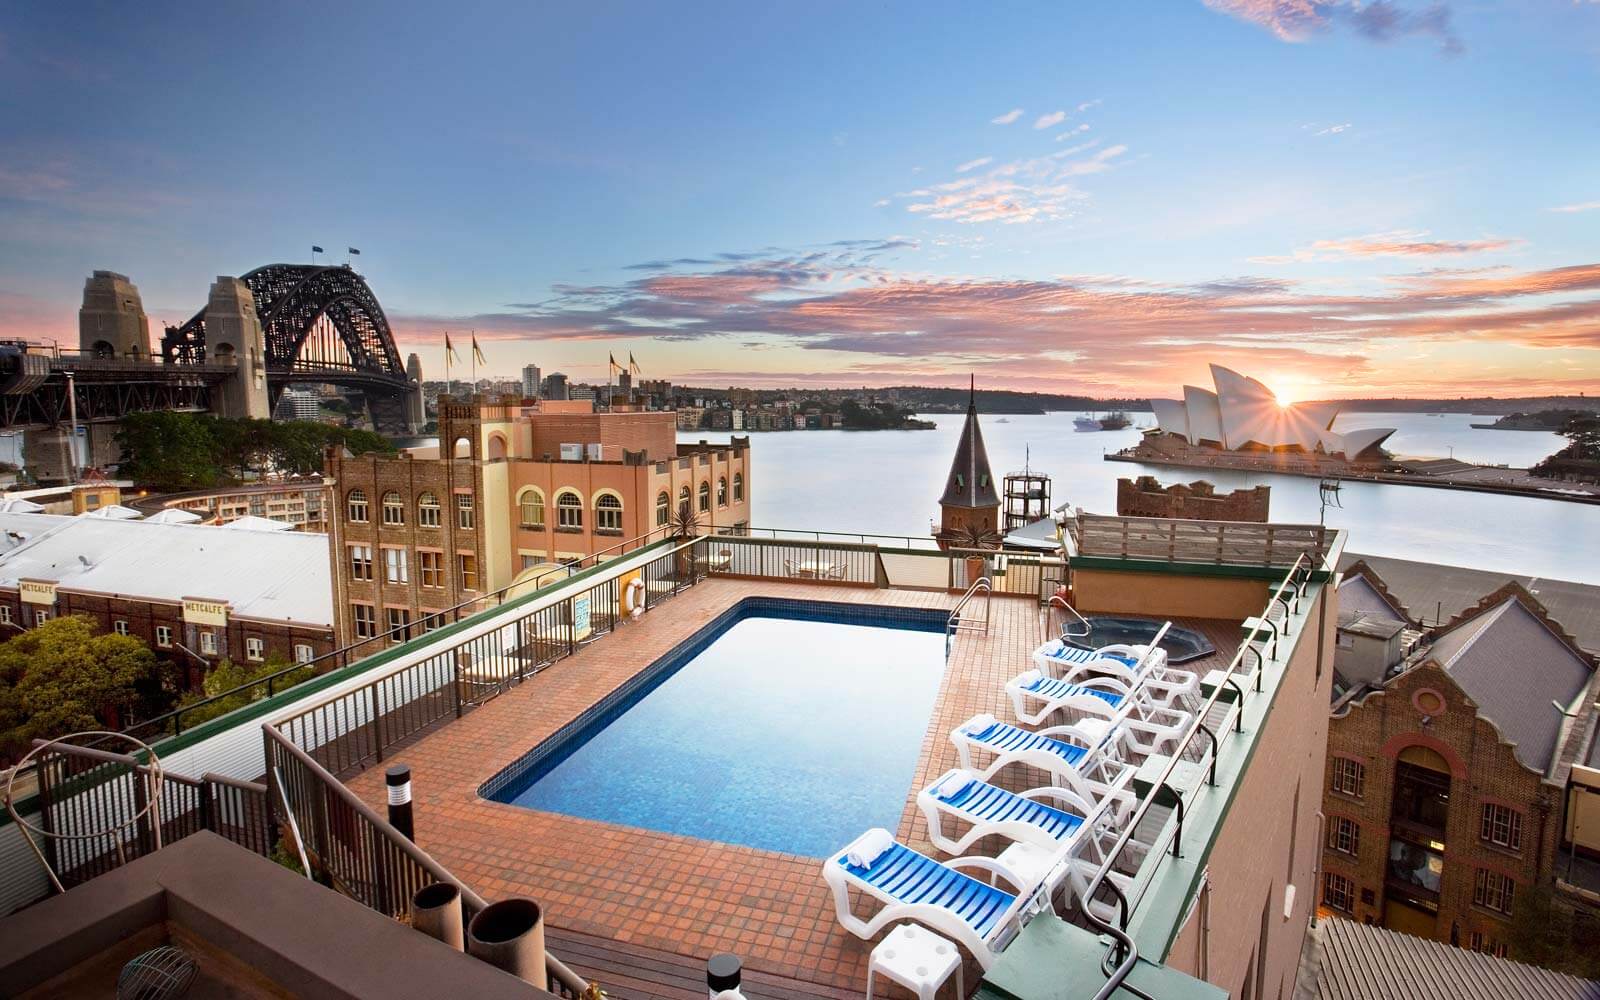 An outdoor swimming pool with lounge chairs and a view of the sydney harbour
